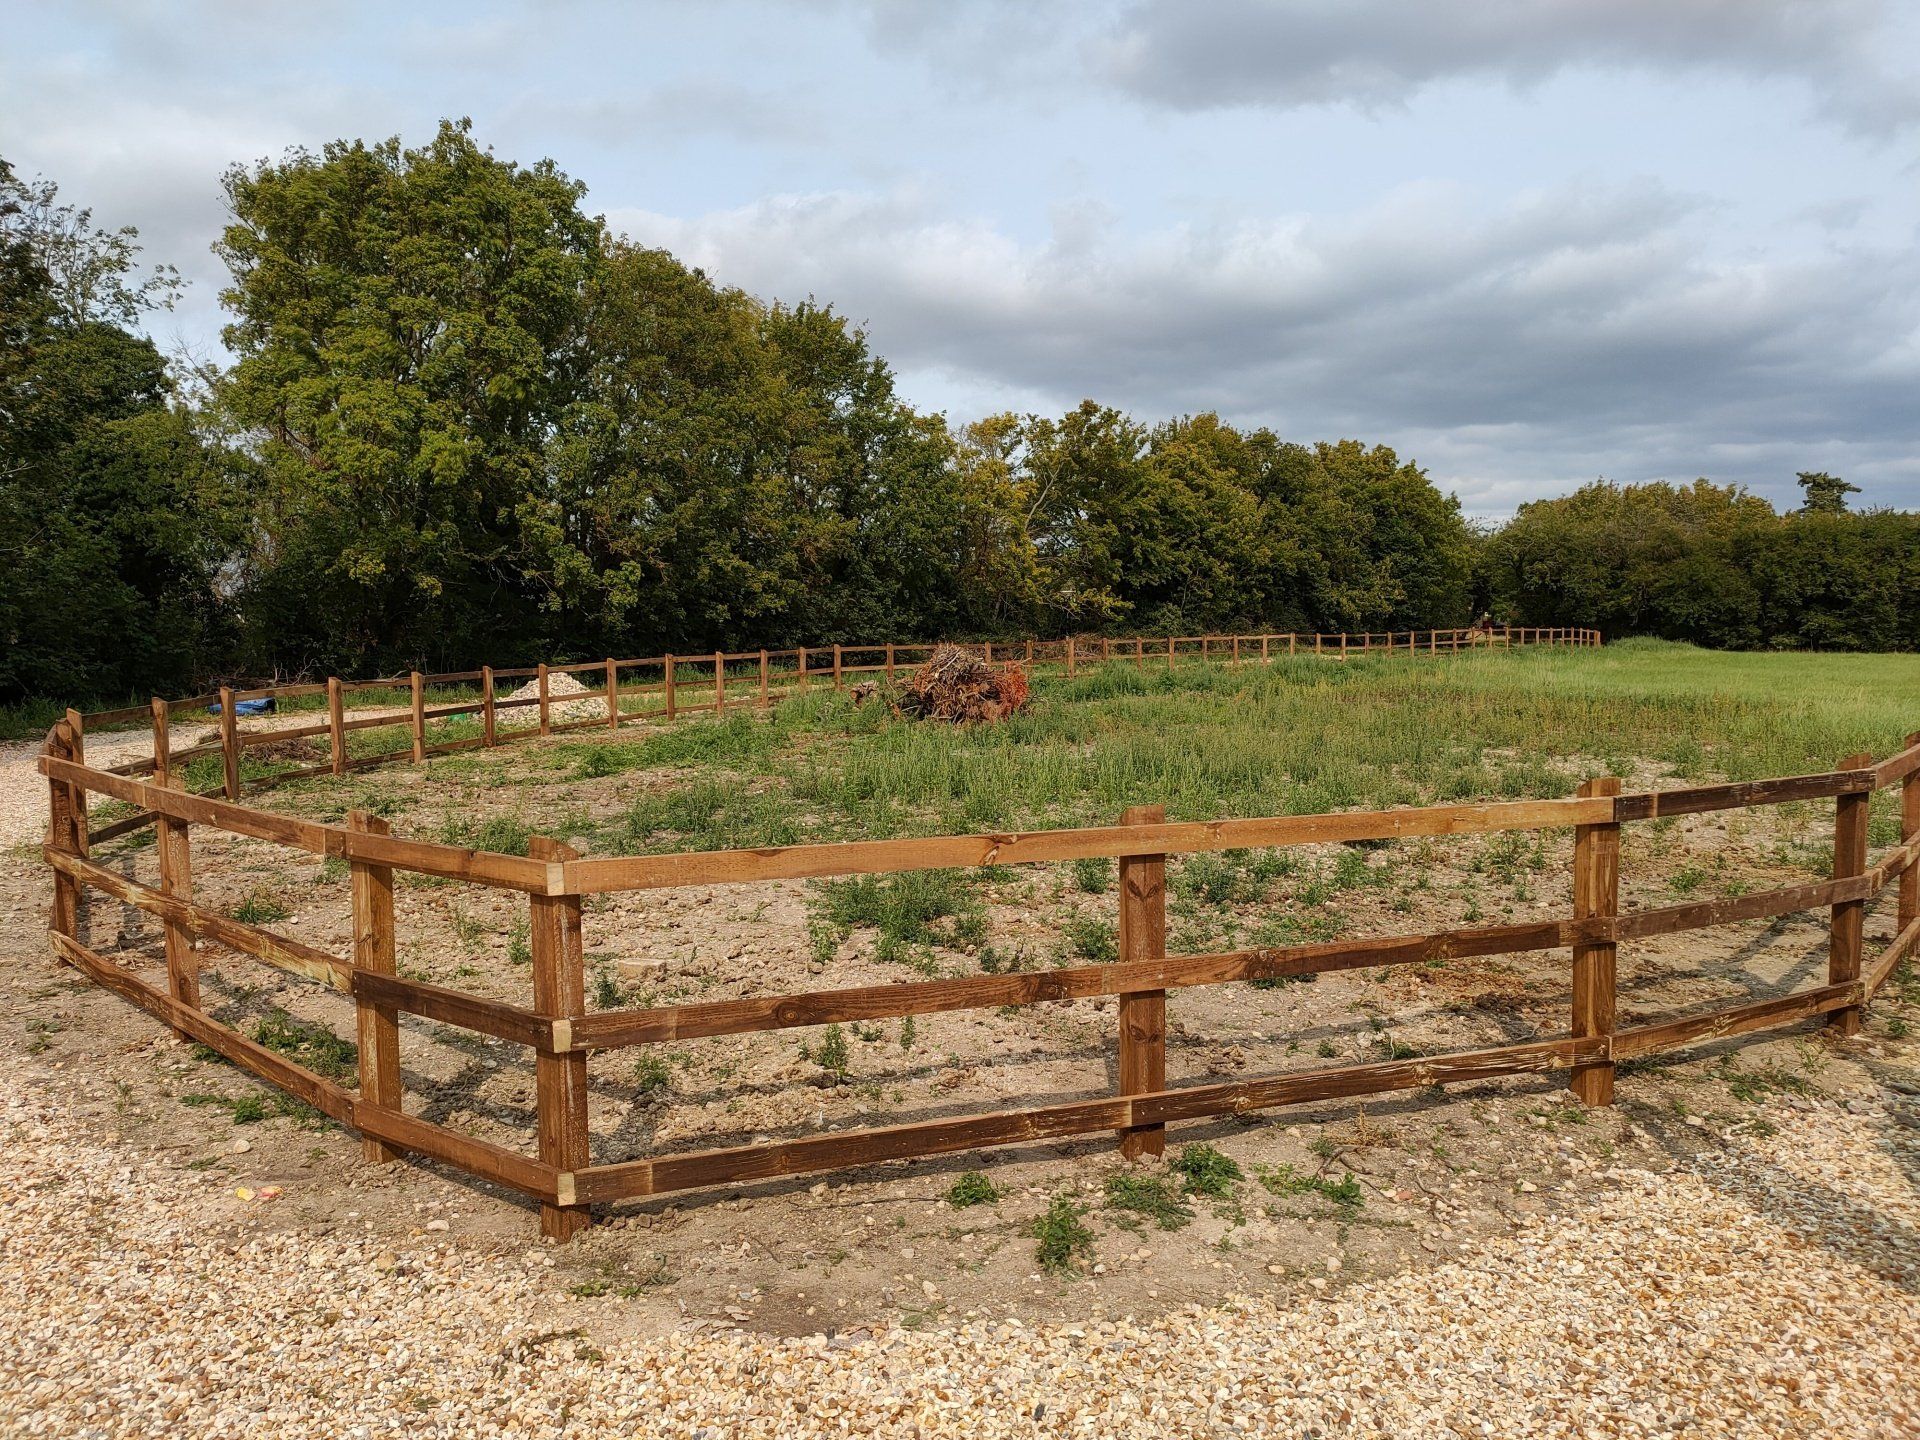 3 rail field fence with corners going towards a field gate.